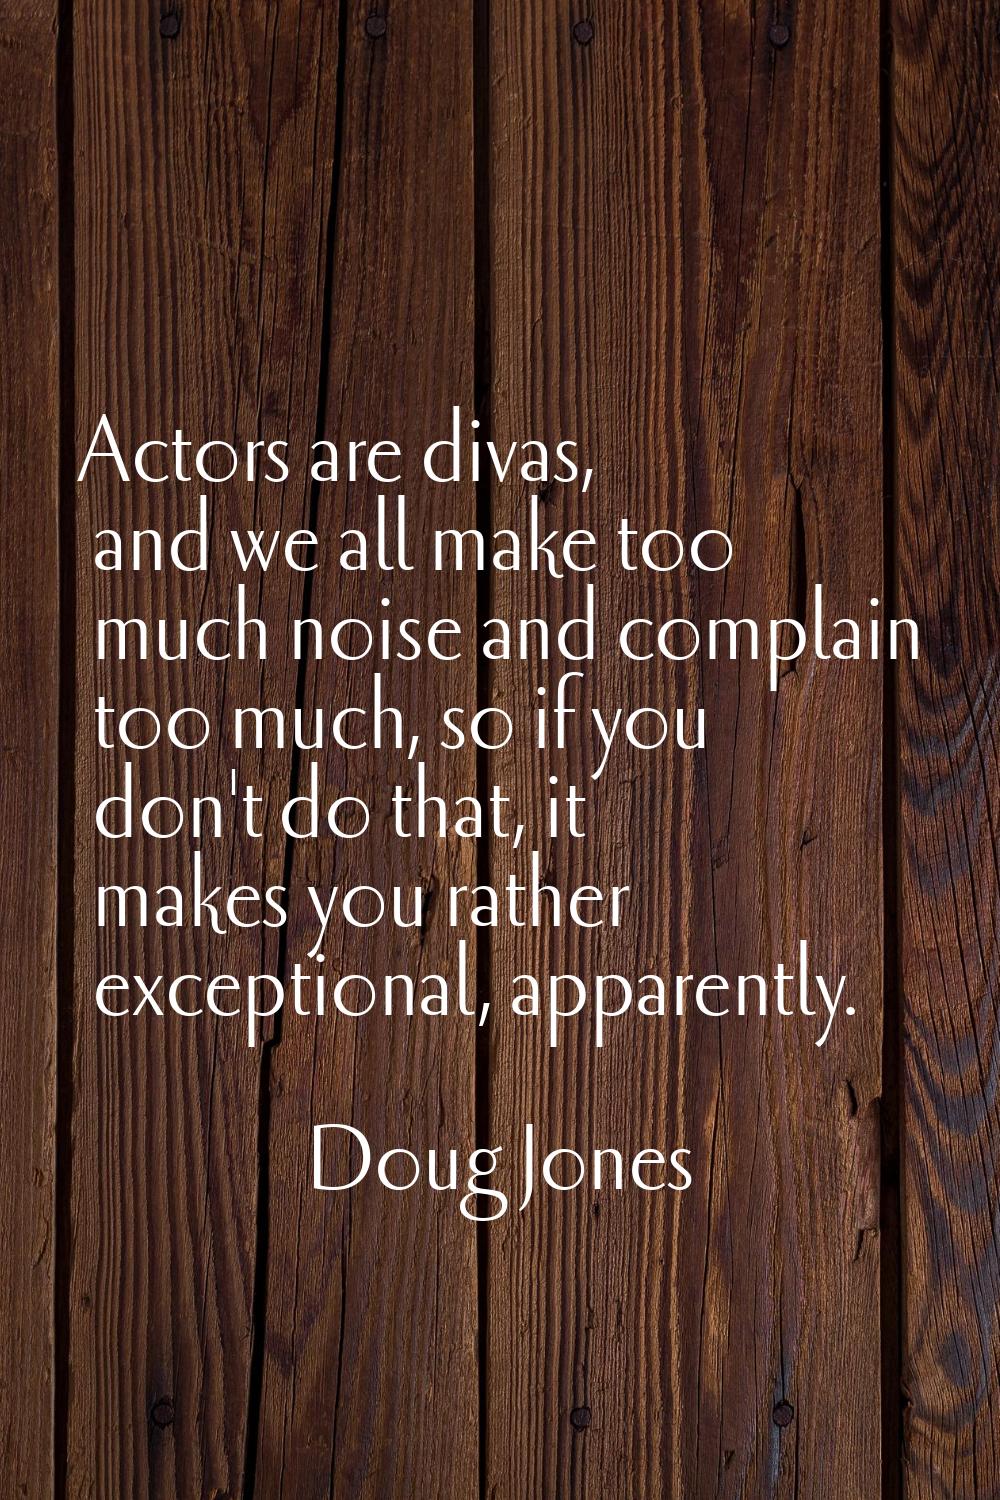 Actors are divas, and we all make too much noise and complain too much, so if you don't do that, it